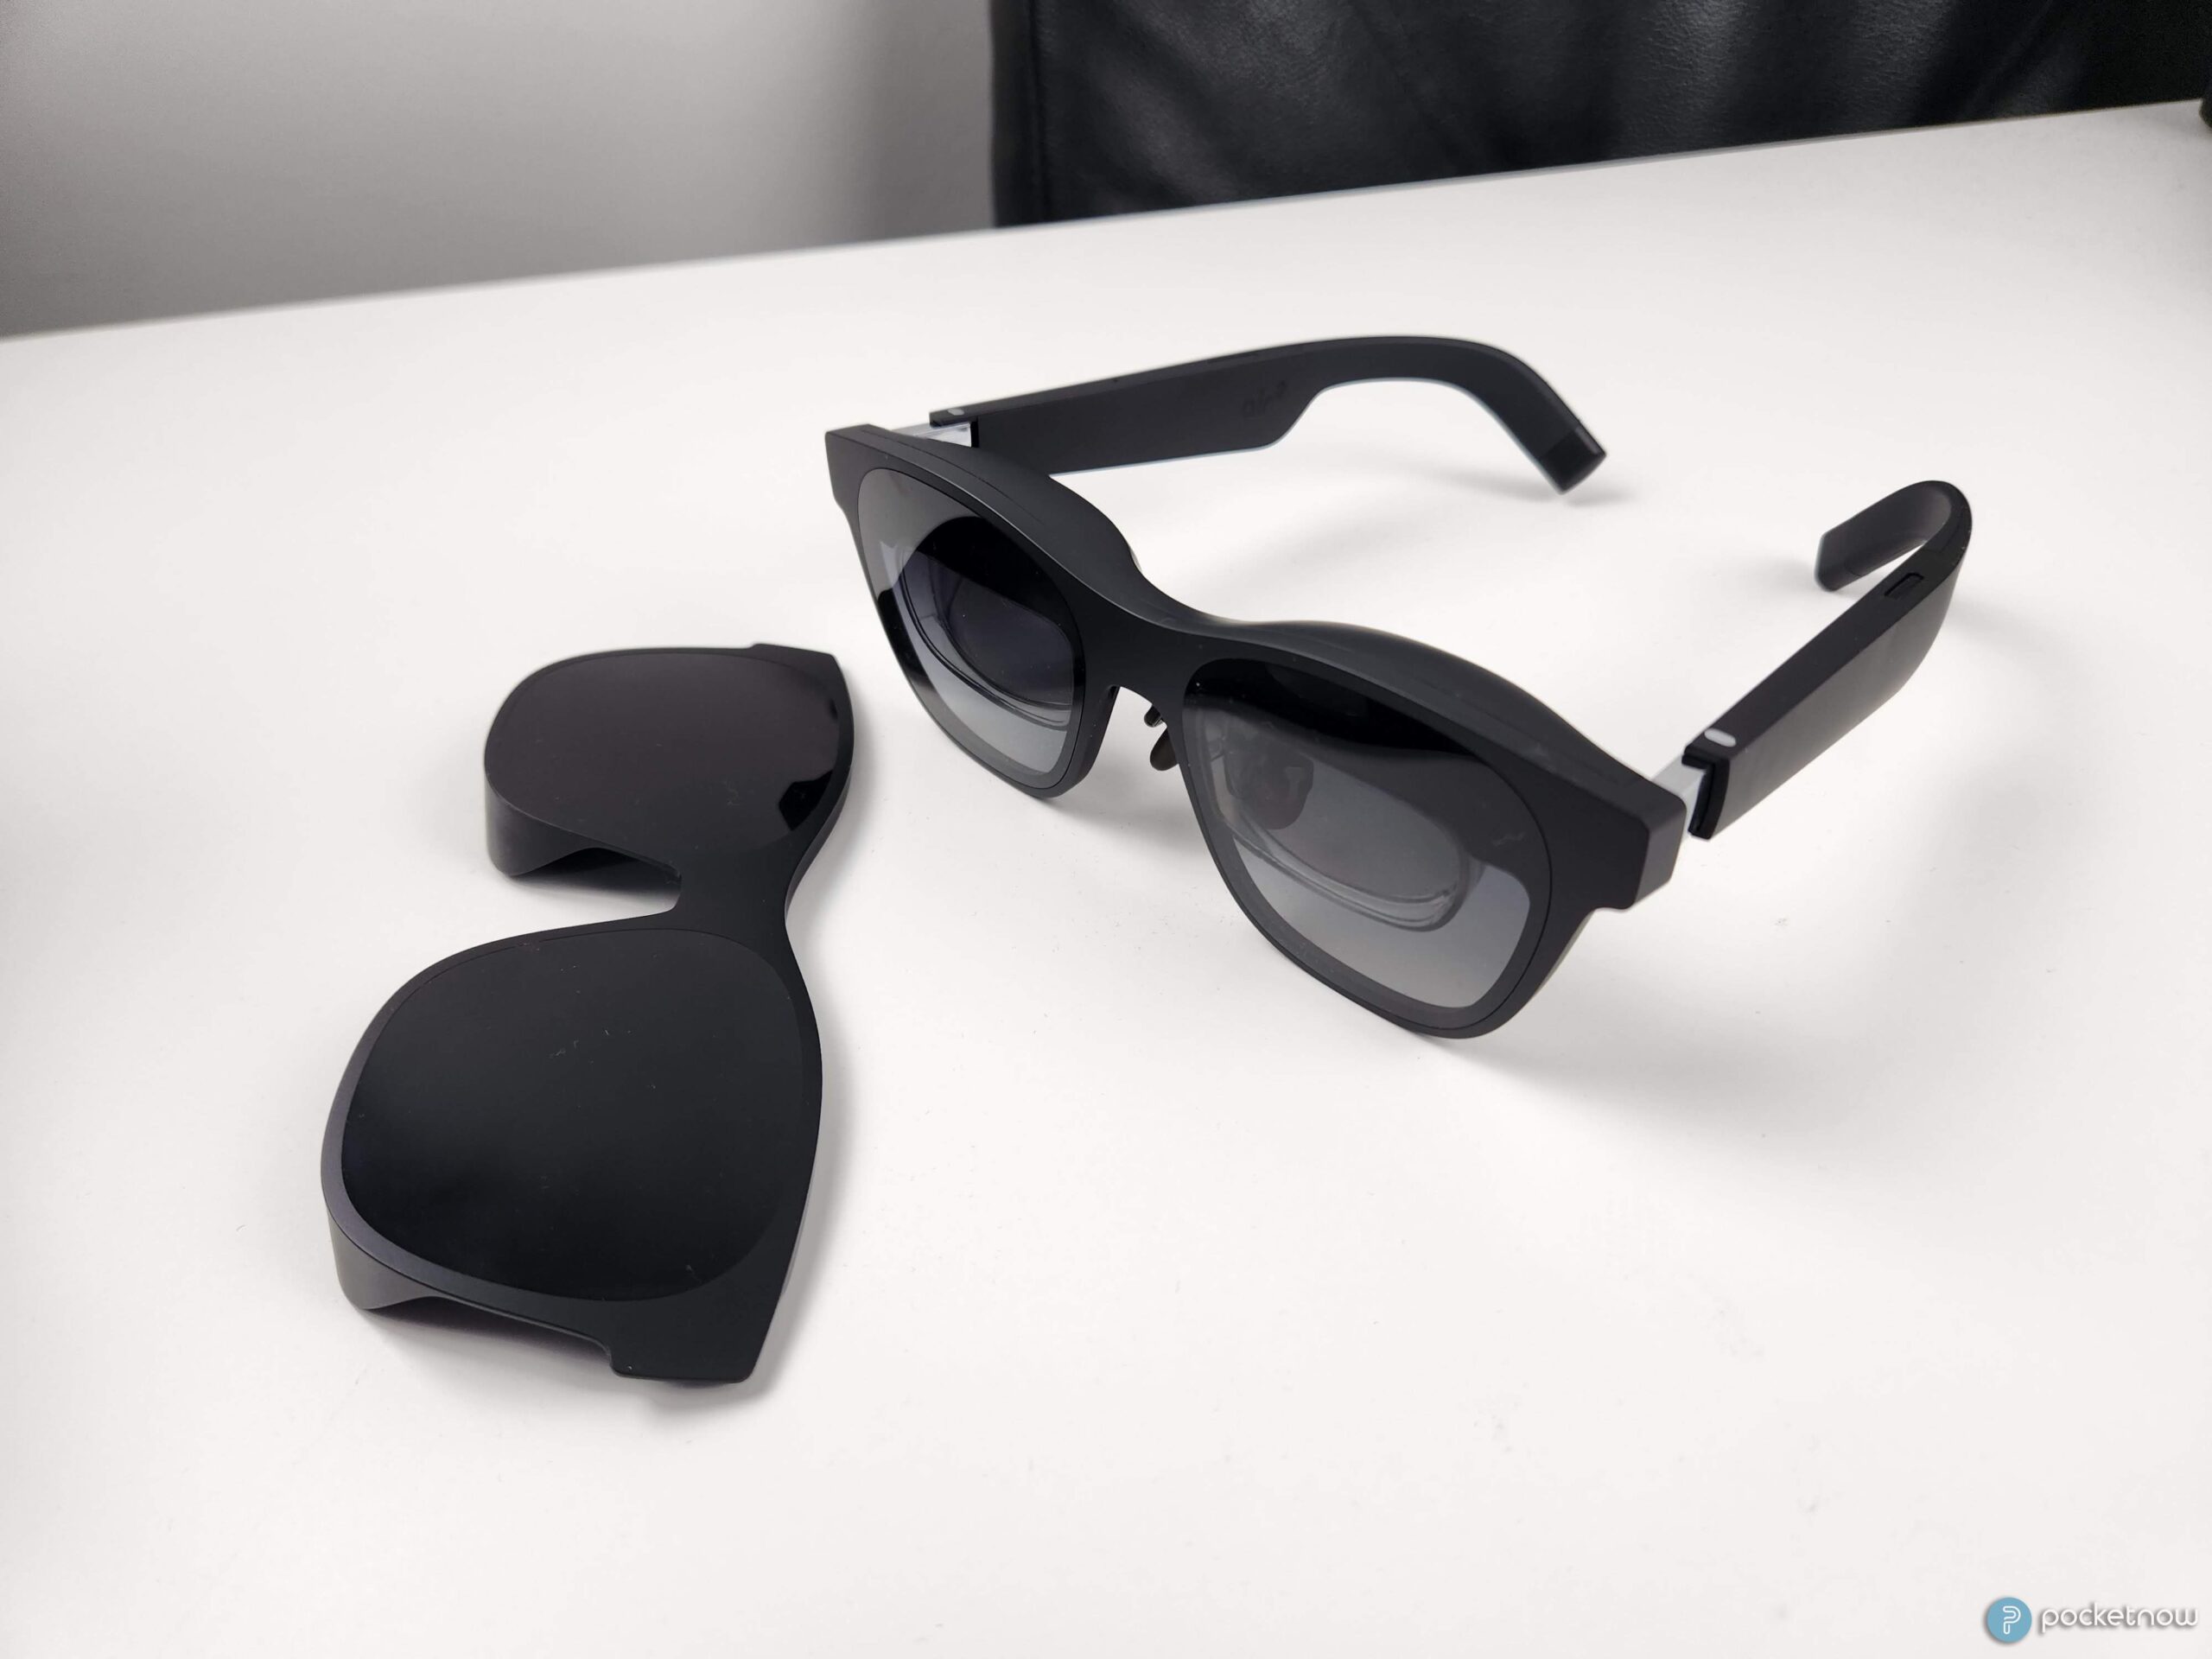 xreal-air-2-ar-glasses-review:-this-shows-great-promise